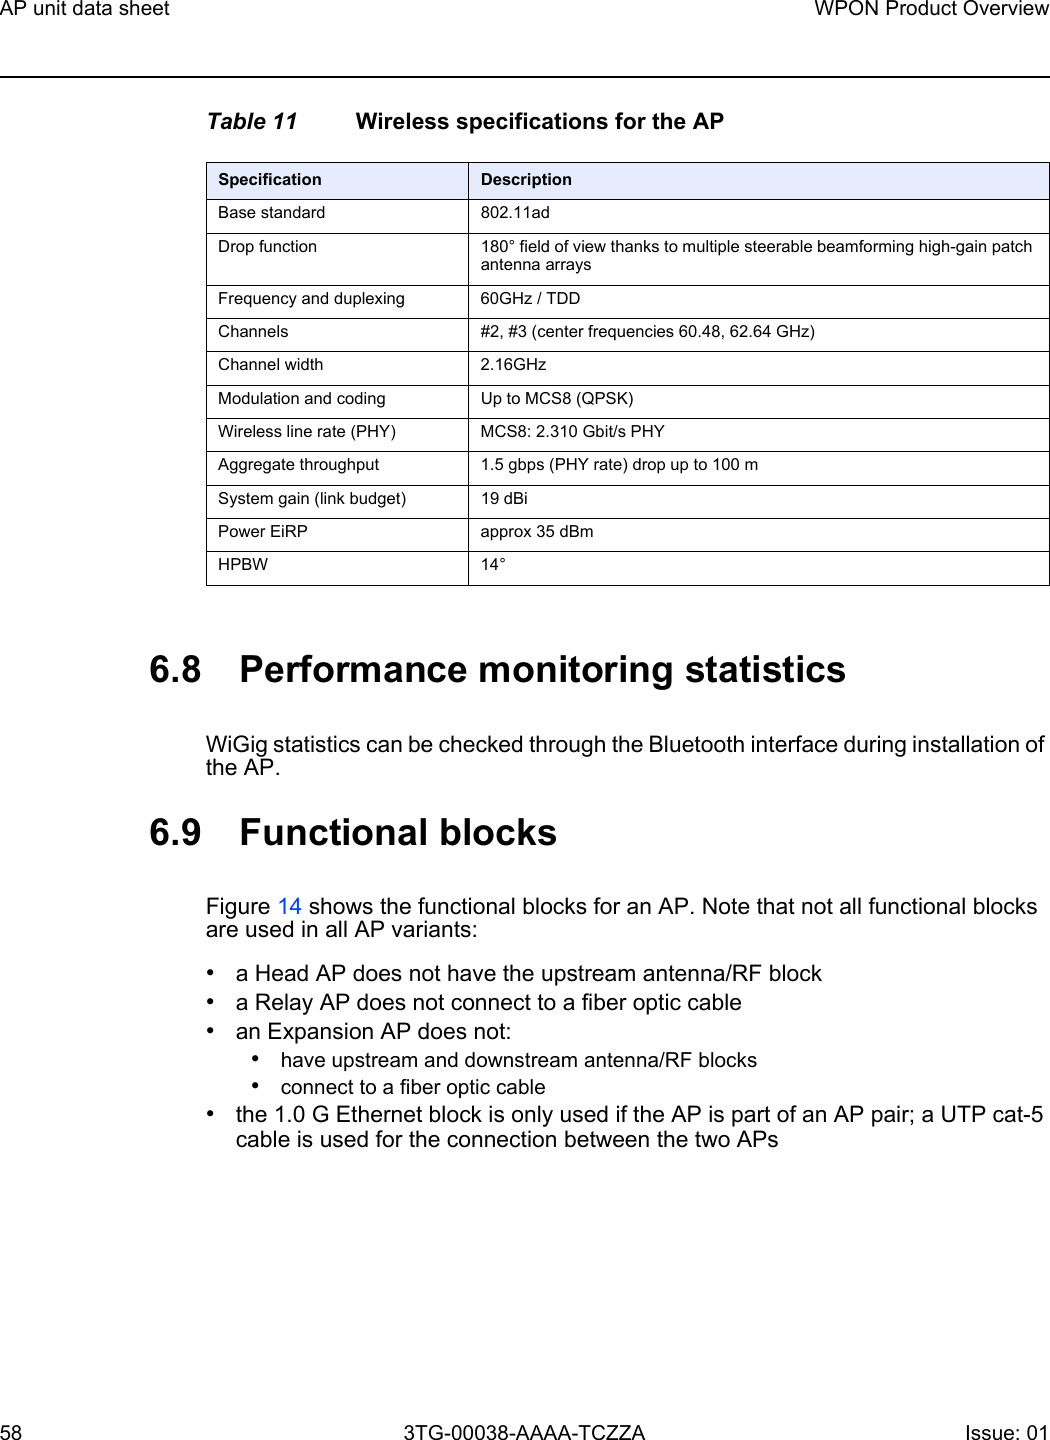 AP unit data sheet58WPON Product Overview3TG-00038-AAAA-TCZZA Issue: 01 Table 11 Wireless specifications for the AP6.8 Performance monitoring statisticsWiGig statistics can be checked through the Bluetooth interface during installation of the AP.6.9 Functional blocksFigure 14 shows the functional blocks for an AP. Note that not all functional blocks are used in all AP variants:•a Head AP does not have the upstream antenna/RF block•a Relay AP does not connect to a fiber optic cable•an Expansion AP does not:•have upstream and downstream antenna/RF blocks •connect to a fiber optic cable•the 1.0 G Ethernet block is only used if the AP is part of an AP pair; a UTP cat-5 cable is used for the connection between the two APsSpecification DescriptionBase standard 802.11adDrop function 180° field of view thanks to multiple steerable beamforming high-gain patch antenna arraysFrequency and duplexing 60GHz / TDDChannels #2, #3 (center frequencies 60.48, 62.64 GHz) Channel width 2.16GHzModulation and coding Up to MCS8 (QPSK)Wireless line rate (PHY) MCS8: 2.310 Gbit/s PHYAggregate throughput 1.5 gbps (PHY rate) drop up to 100 mSystem gain (link budget) 19 dBi Power EiRP approx 35 dBm HPBW 14°